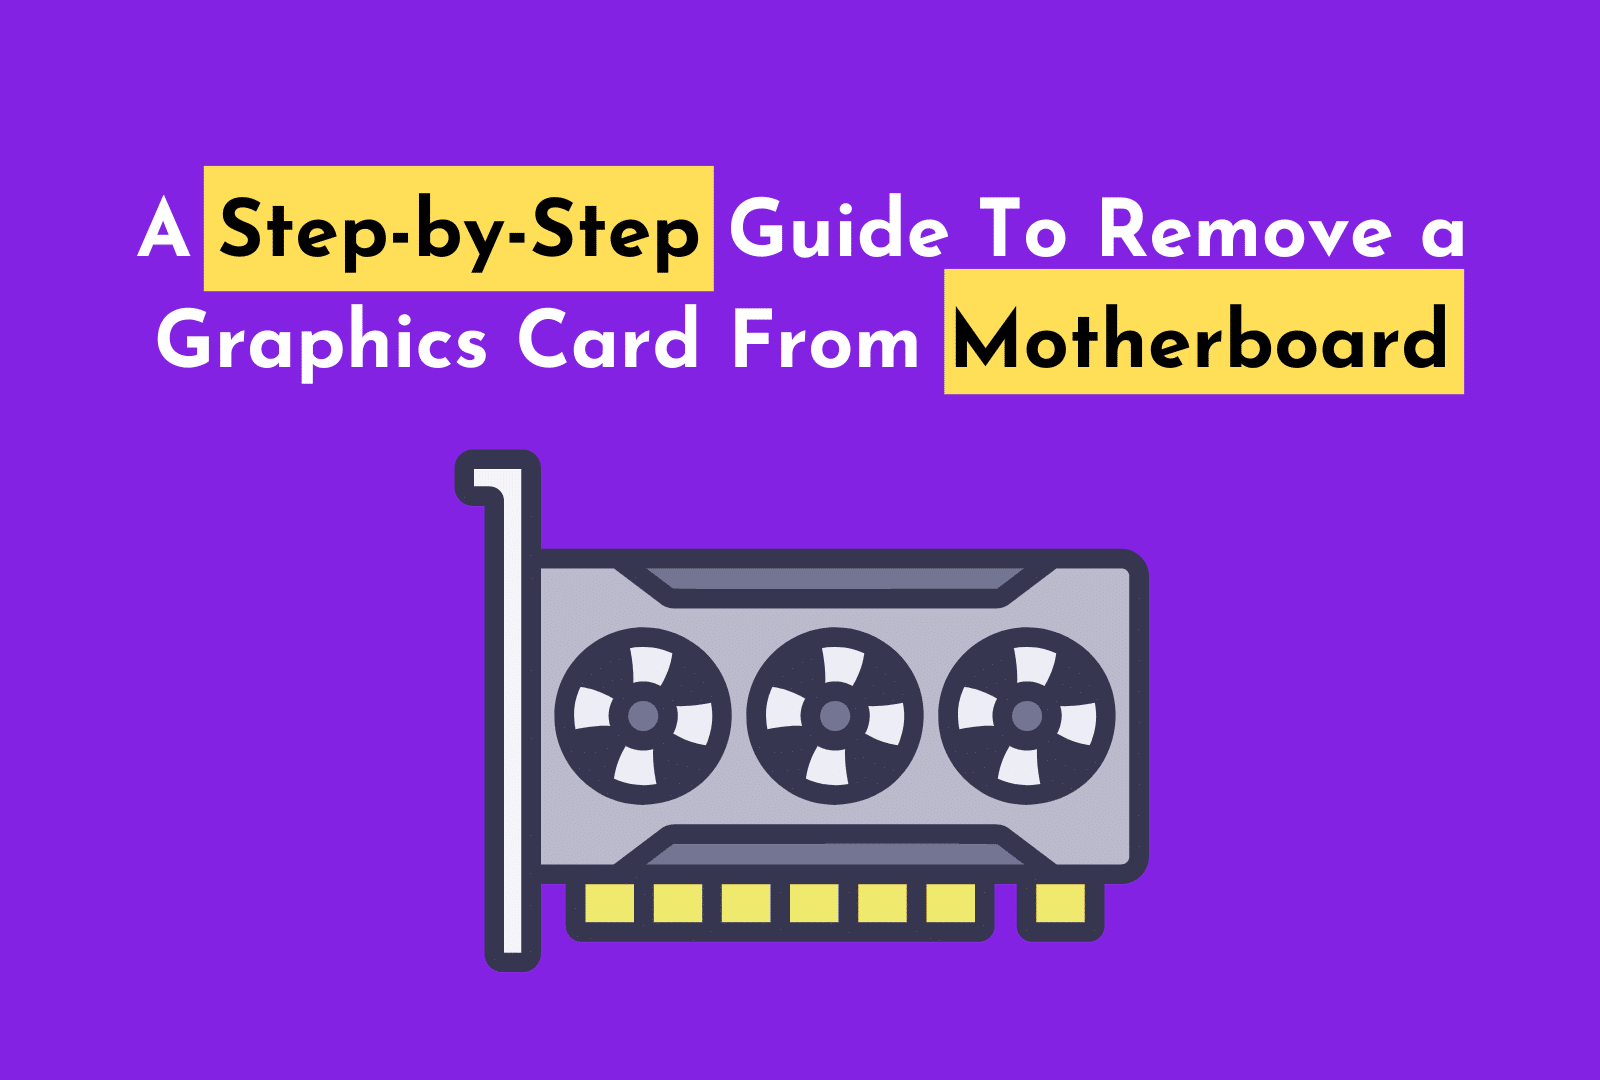 C:\Users\Mohsin\Downloads\A Step-by-Step Guide To Remove a Graphics Card From Motherboard.png